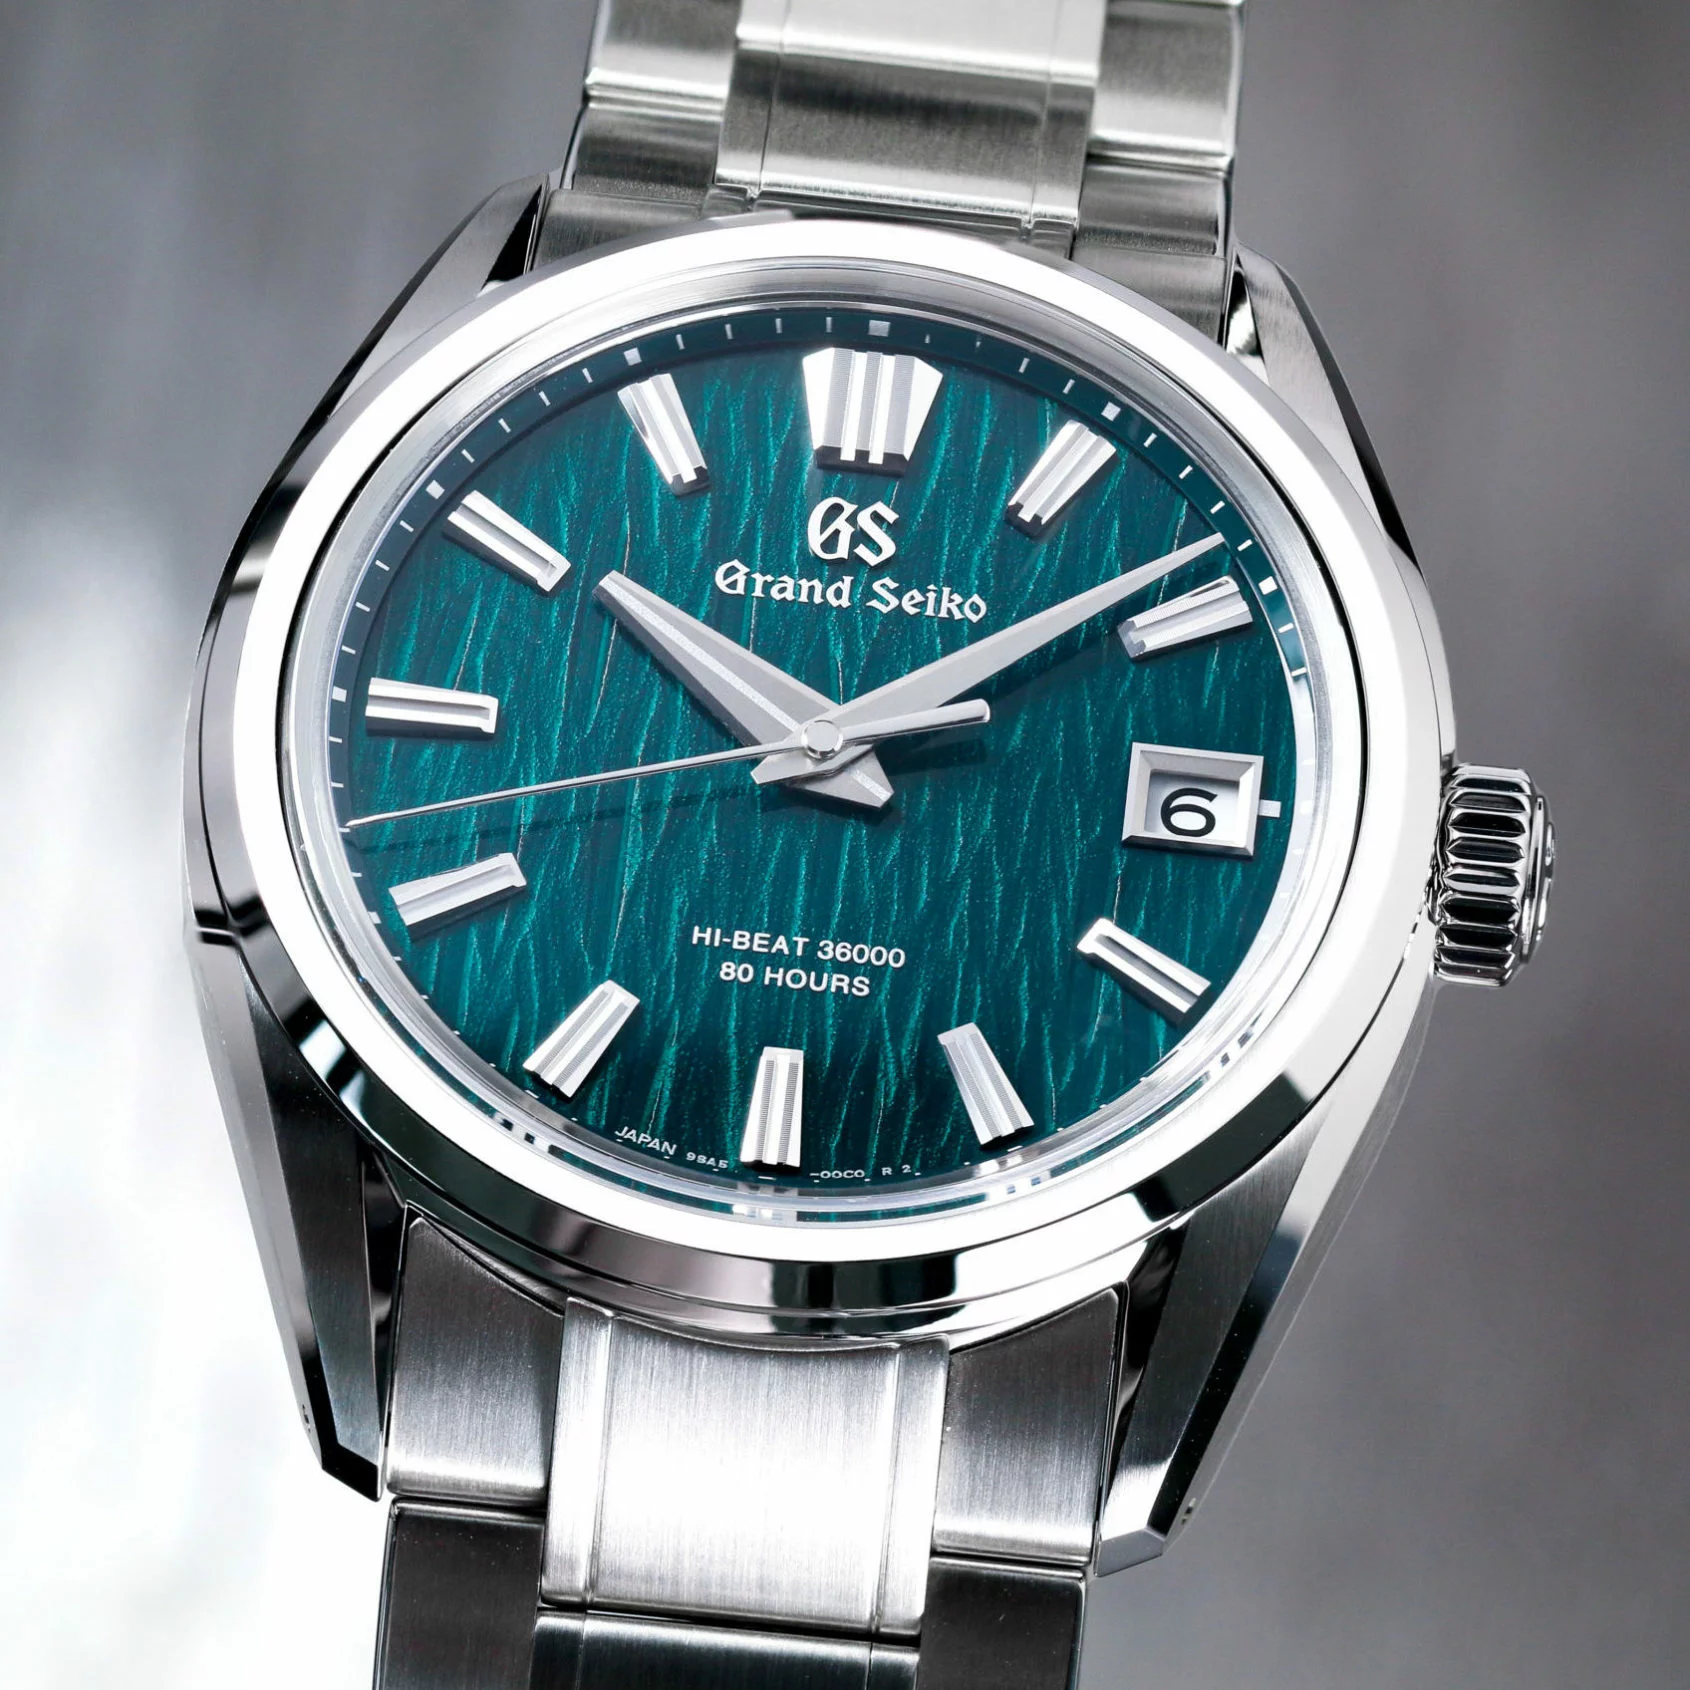 The birch family tree grows with new Grand Seiko SLGH011 